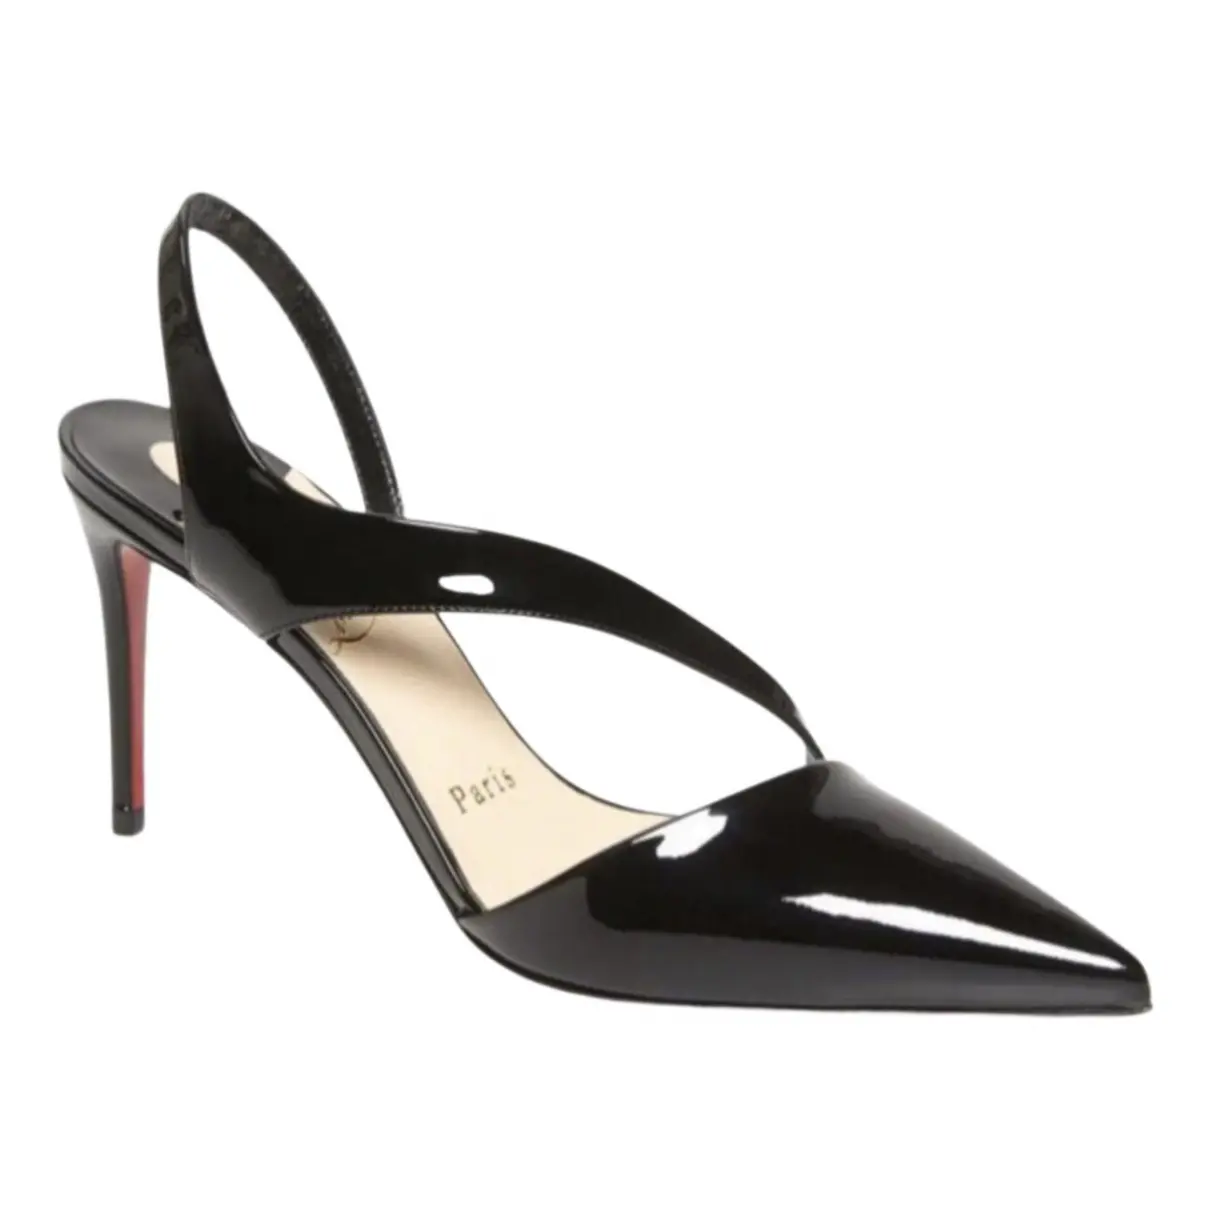 Buy Christian Louboutin Patent leather sandals online